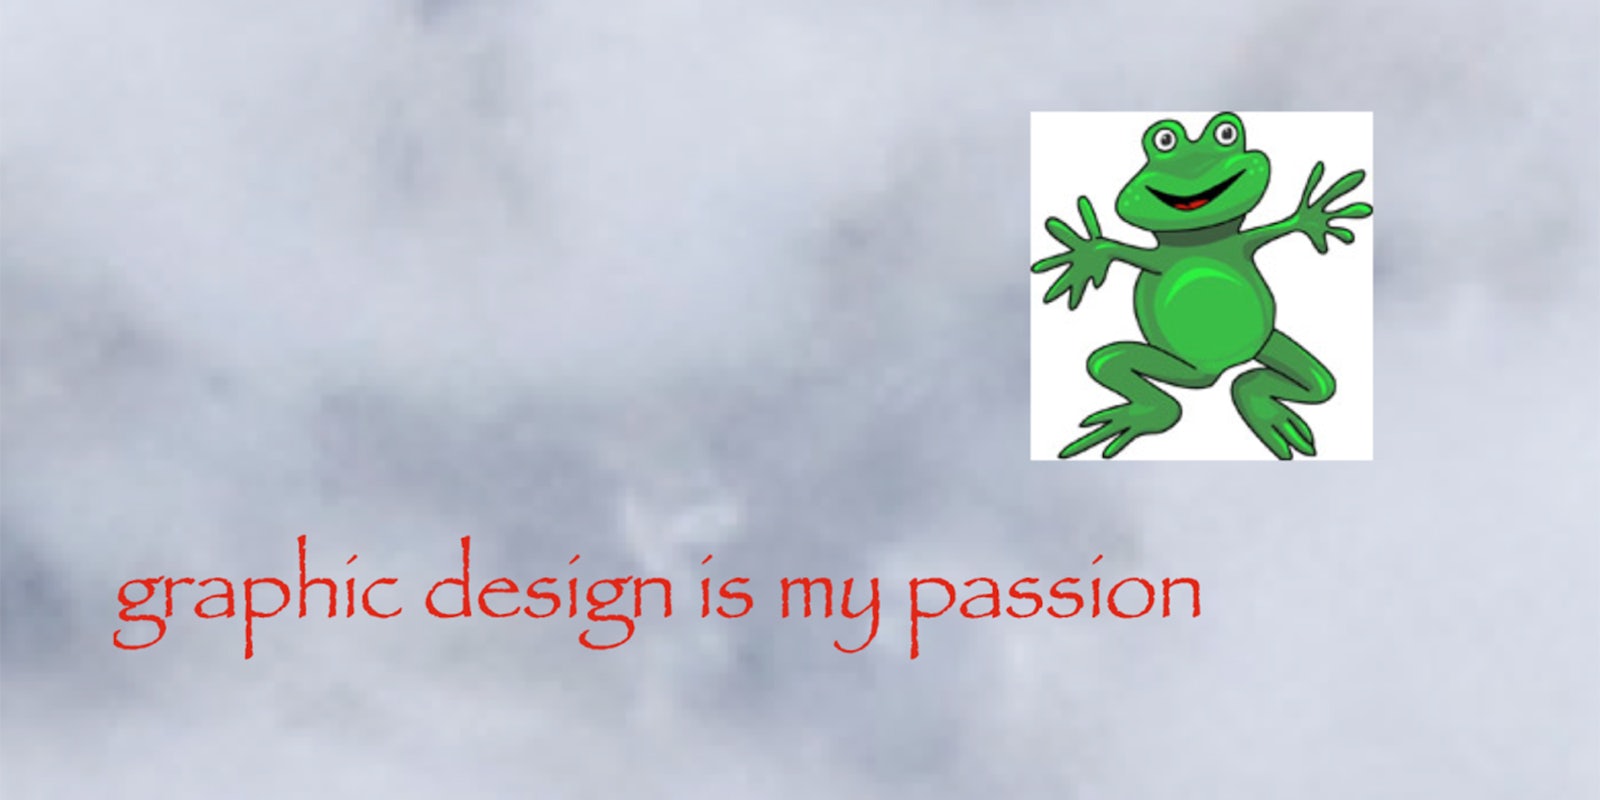 graphic design is my passion text written in papyrus with a clipart of a green frog against a cloudy gray background